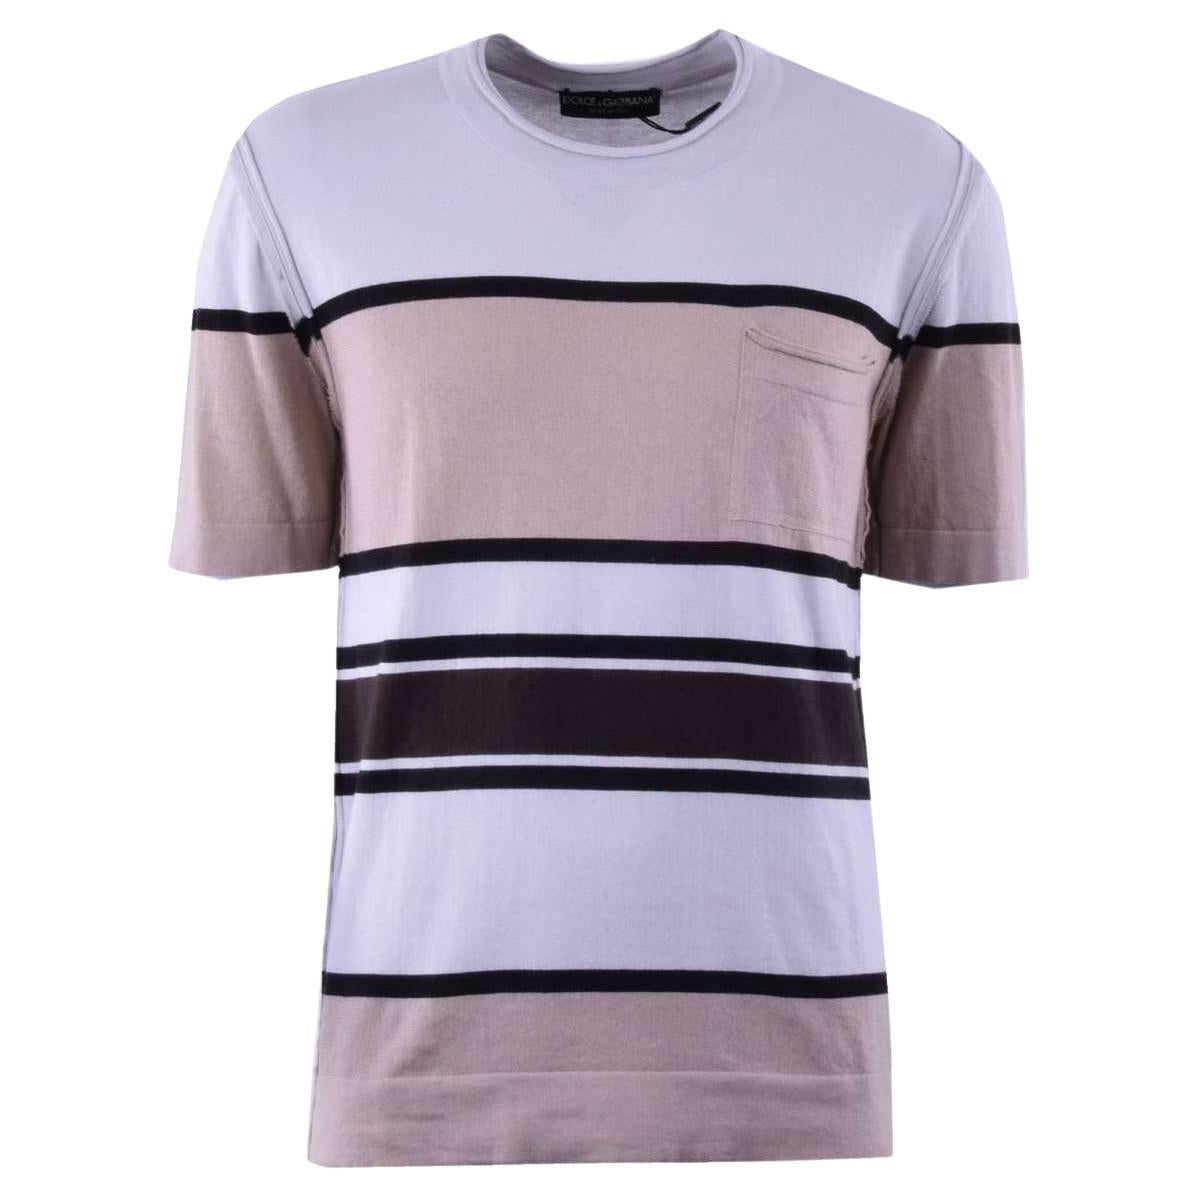 Dolce & Gabbana - Knitted Cotton Cashmere T-Shirt with Stripes Brown Beige 44 For Sale